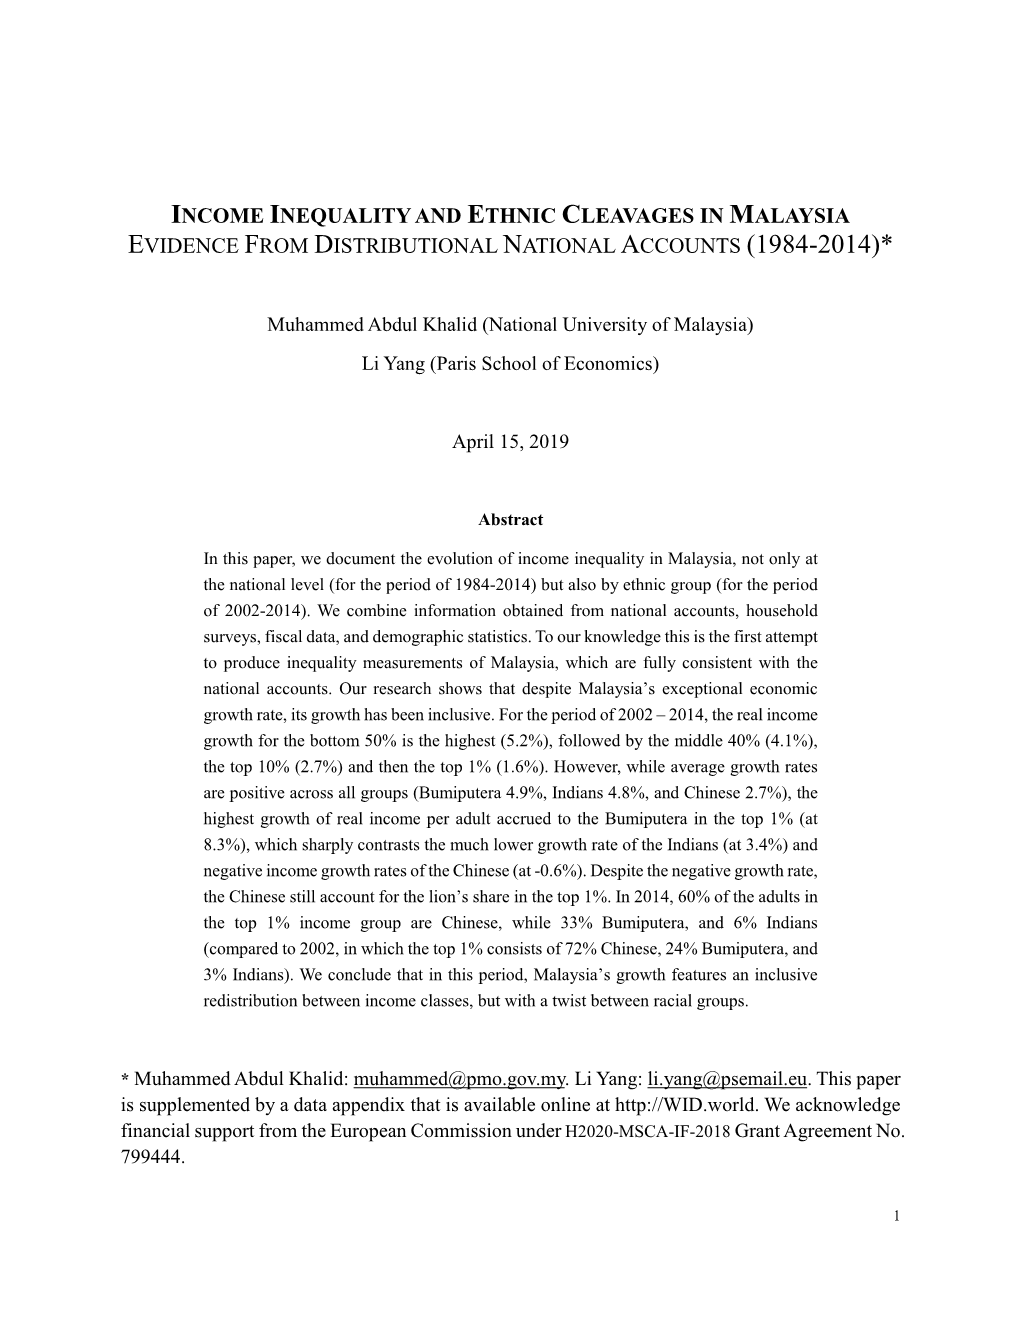 Income Inequality and Ethnic Cleavages in Malaysia Evidence from Distributional National Accounts (1984-2014)*